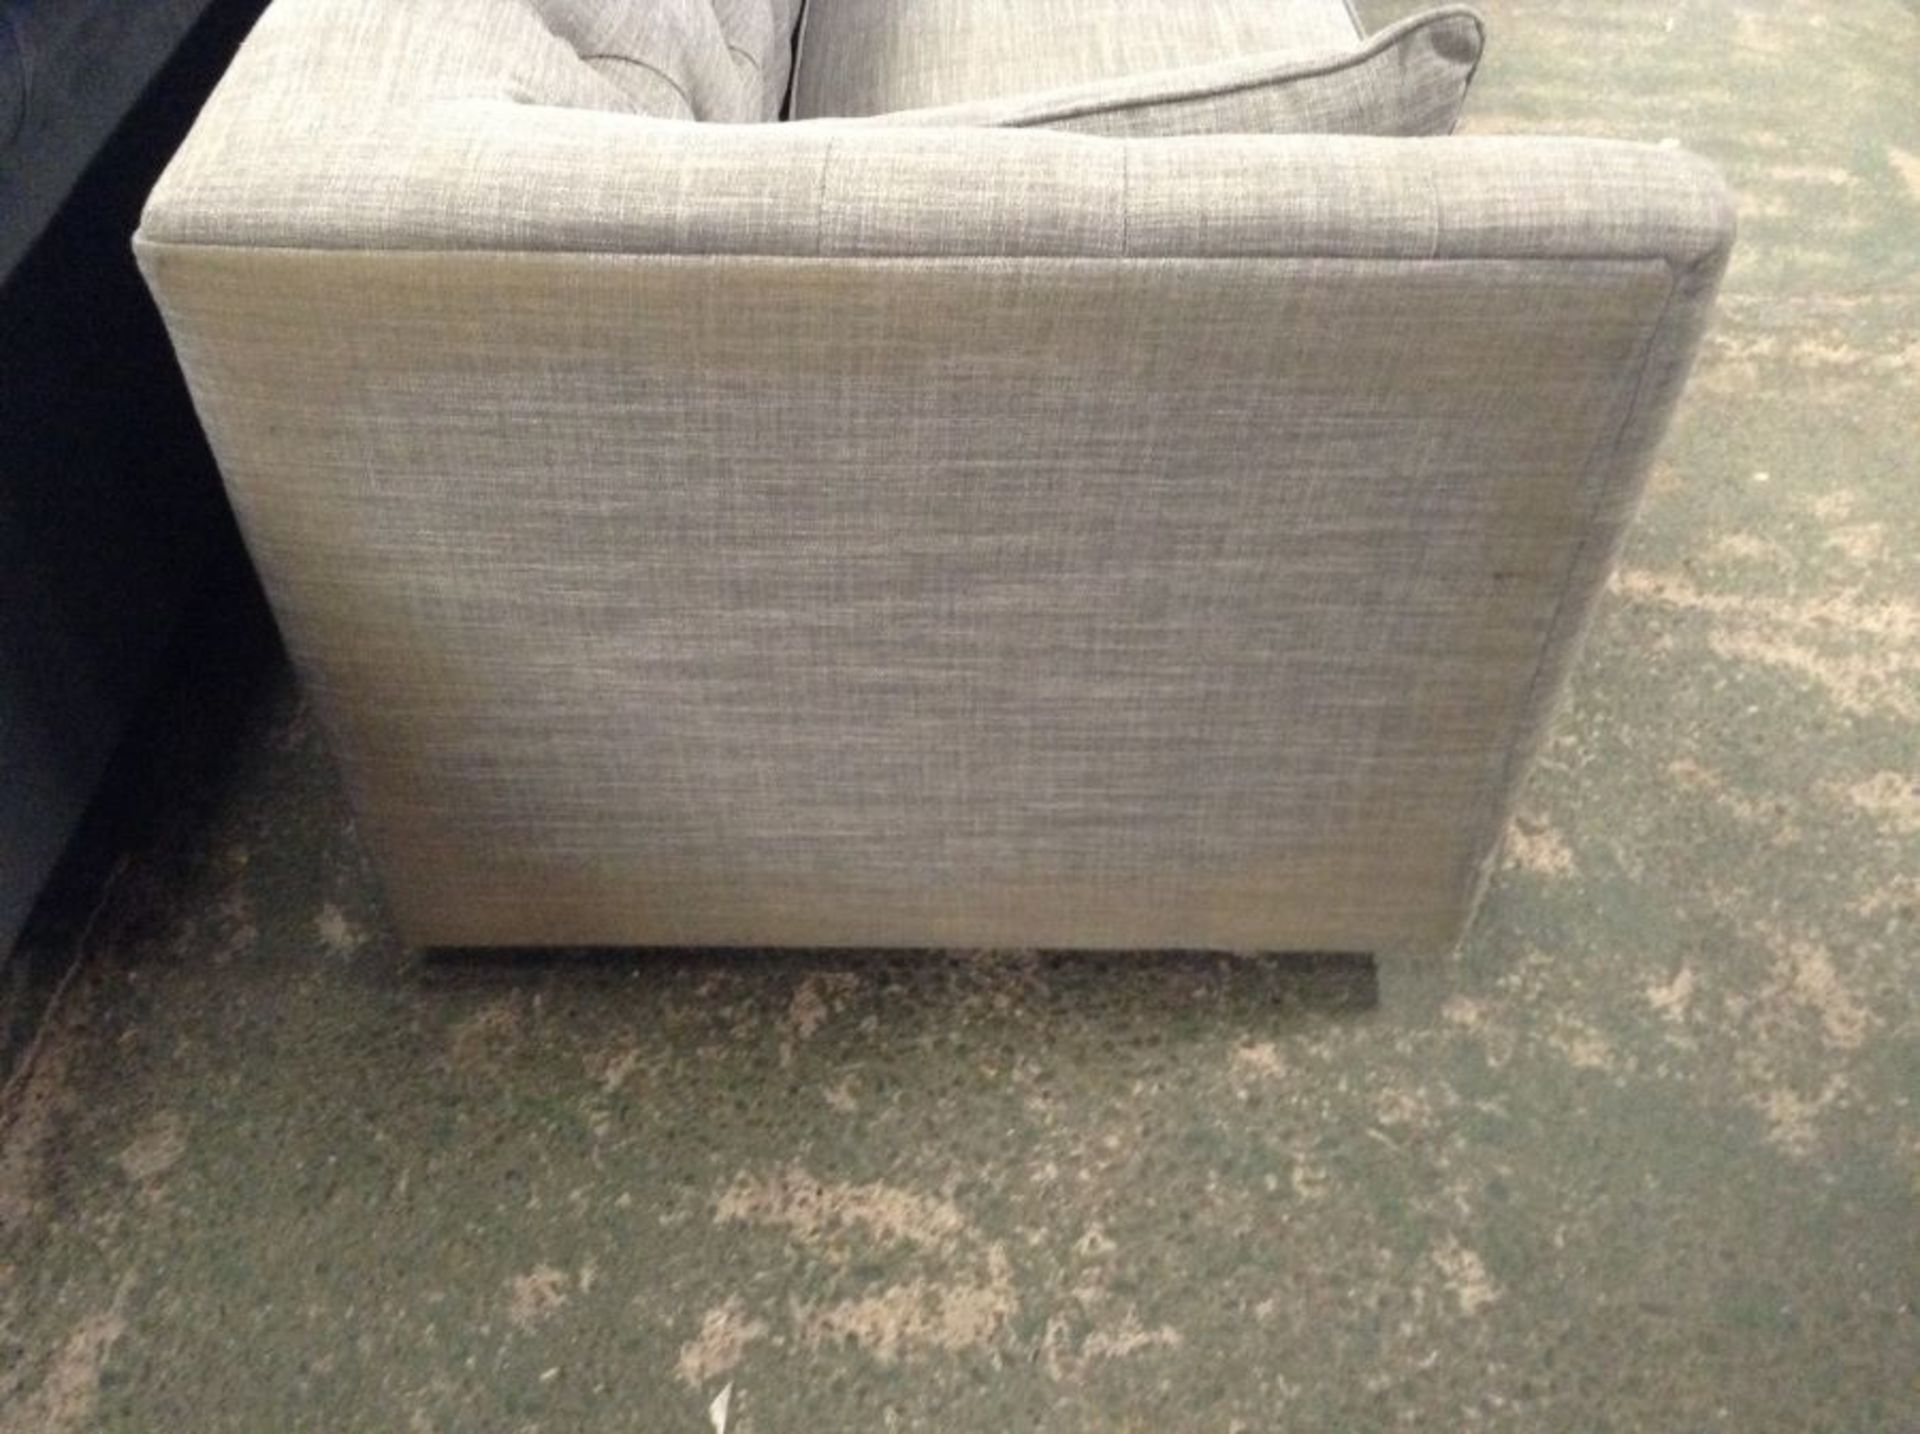 |1X|MADE.COM GREY BUTTON BACK 3 SEATER SOFA|DIRTY MISSING CORRECT FEET|21/2| - Image 2 of 2